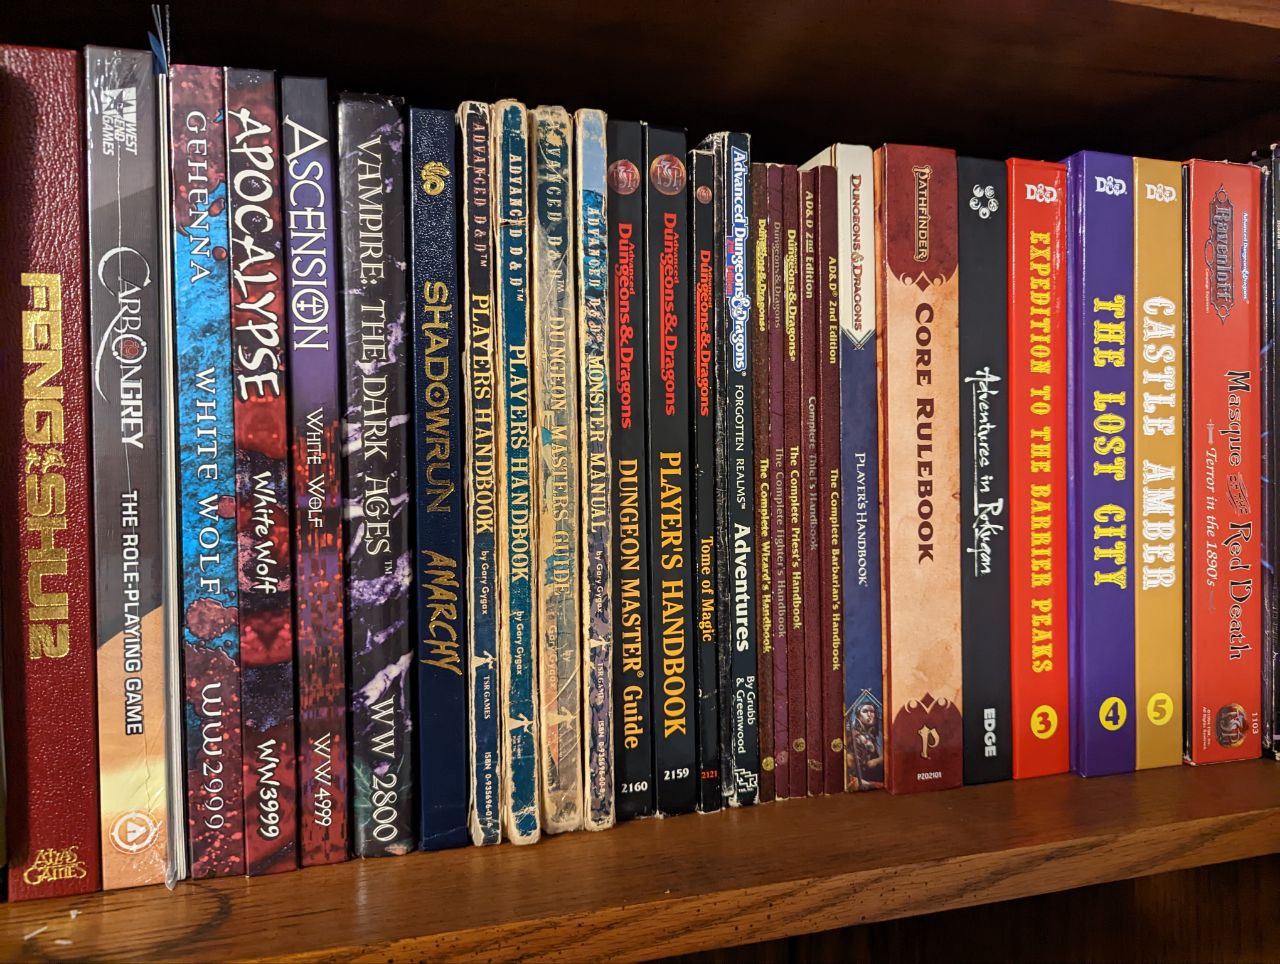 Collection of TTRPG books on a shelf. A mix of games from various generations including D&D, Feng Shui, and Shadowrun